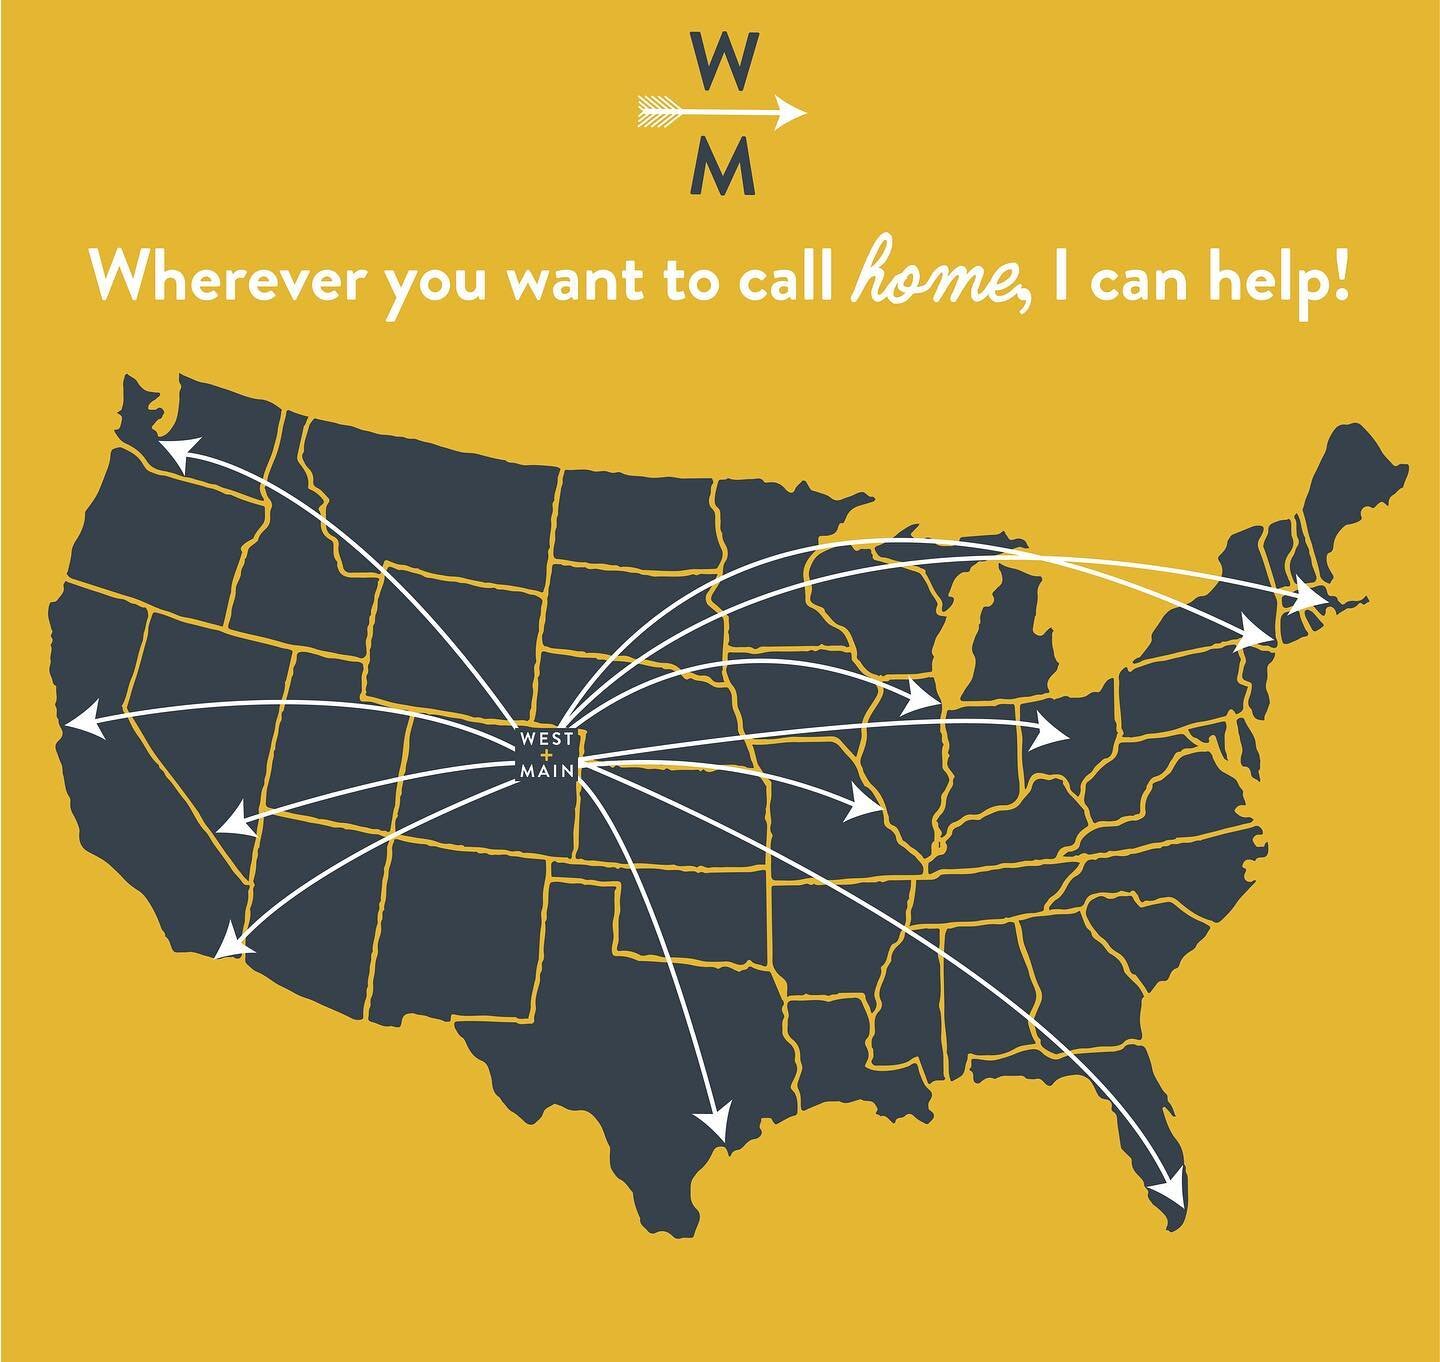 One thing that I often forget to mention to friends and family is that I have a wide network of amazing Realtors across the country. If you need some great names of who to work with, no matter where you live, let me know and I&rsquo;ll connect you wi